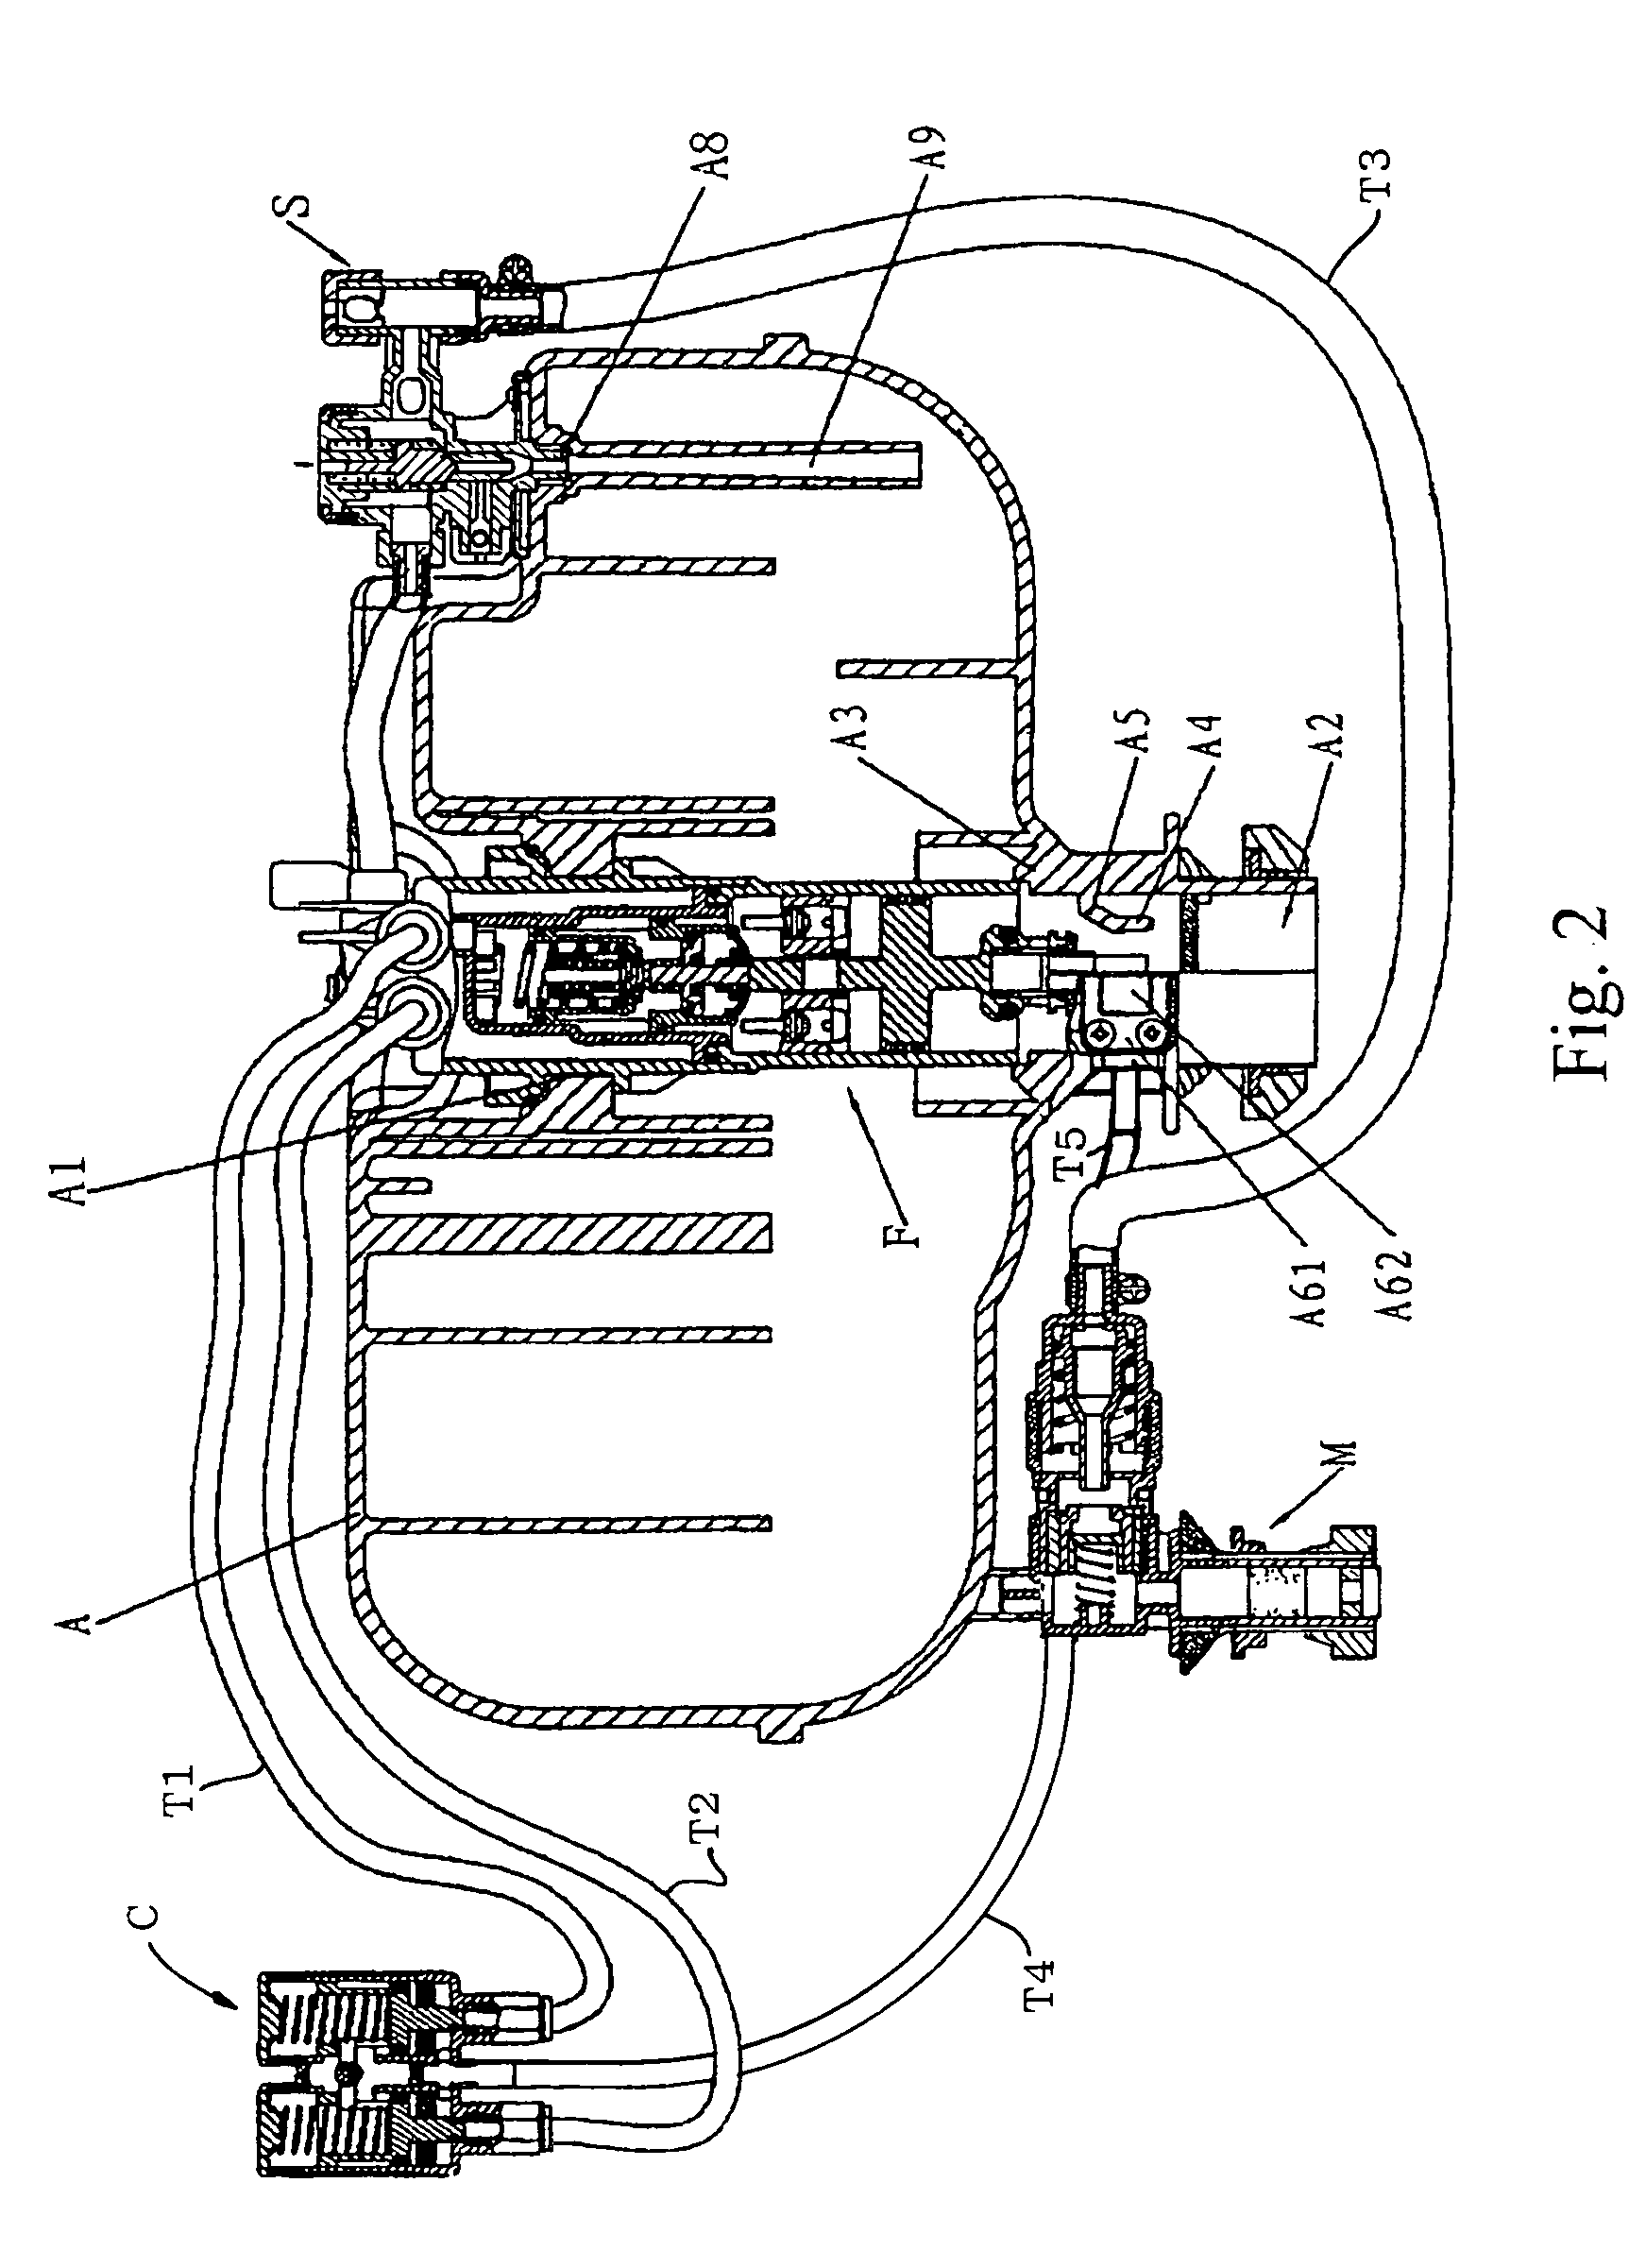 Pressure assisted dual flush operating system